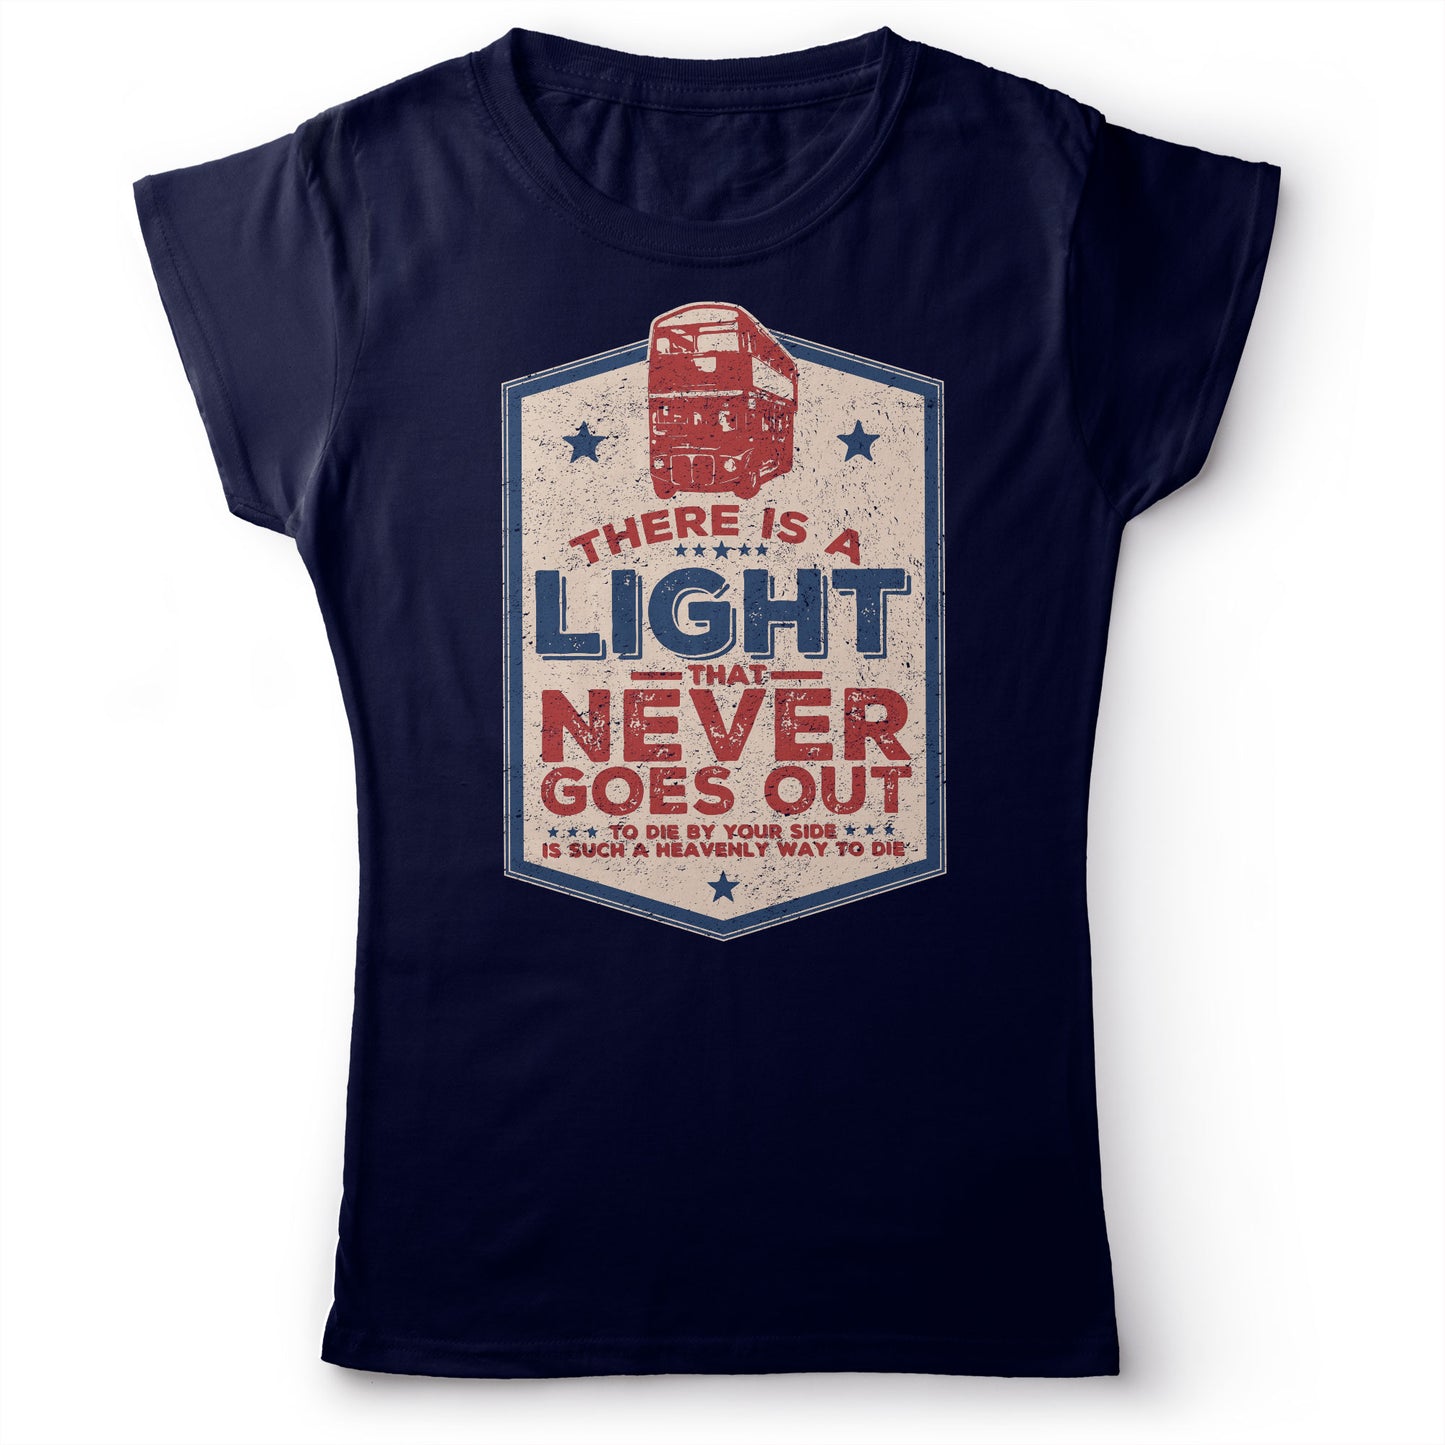 The Smiths - There Is A Light That Never Goes Out - Women's T-shirt Navy Blue 2